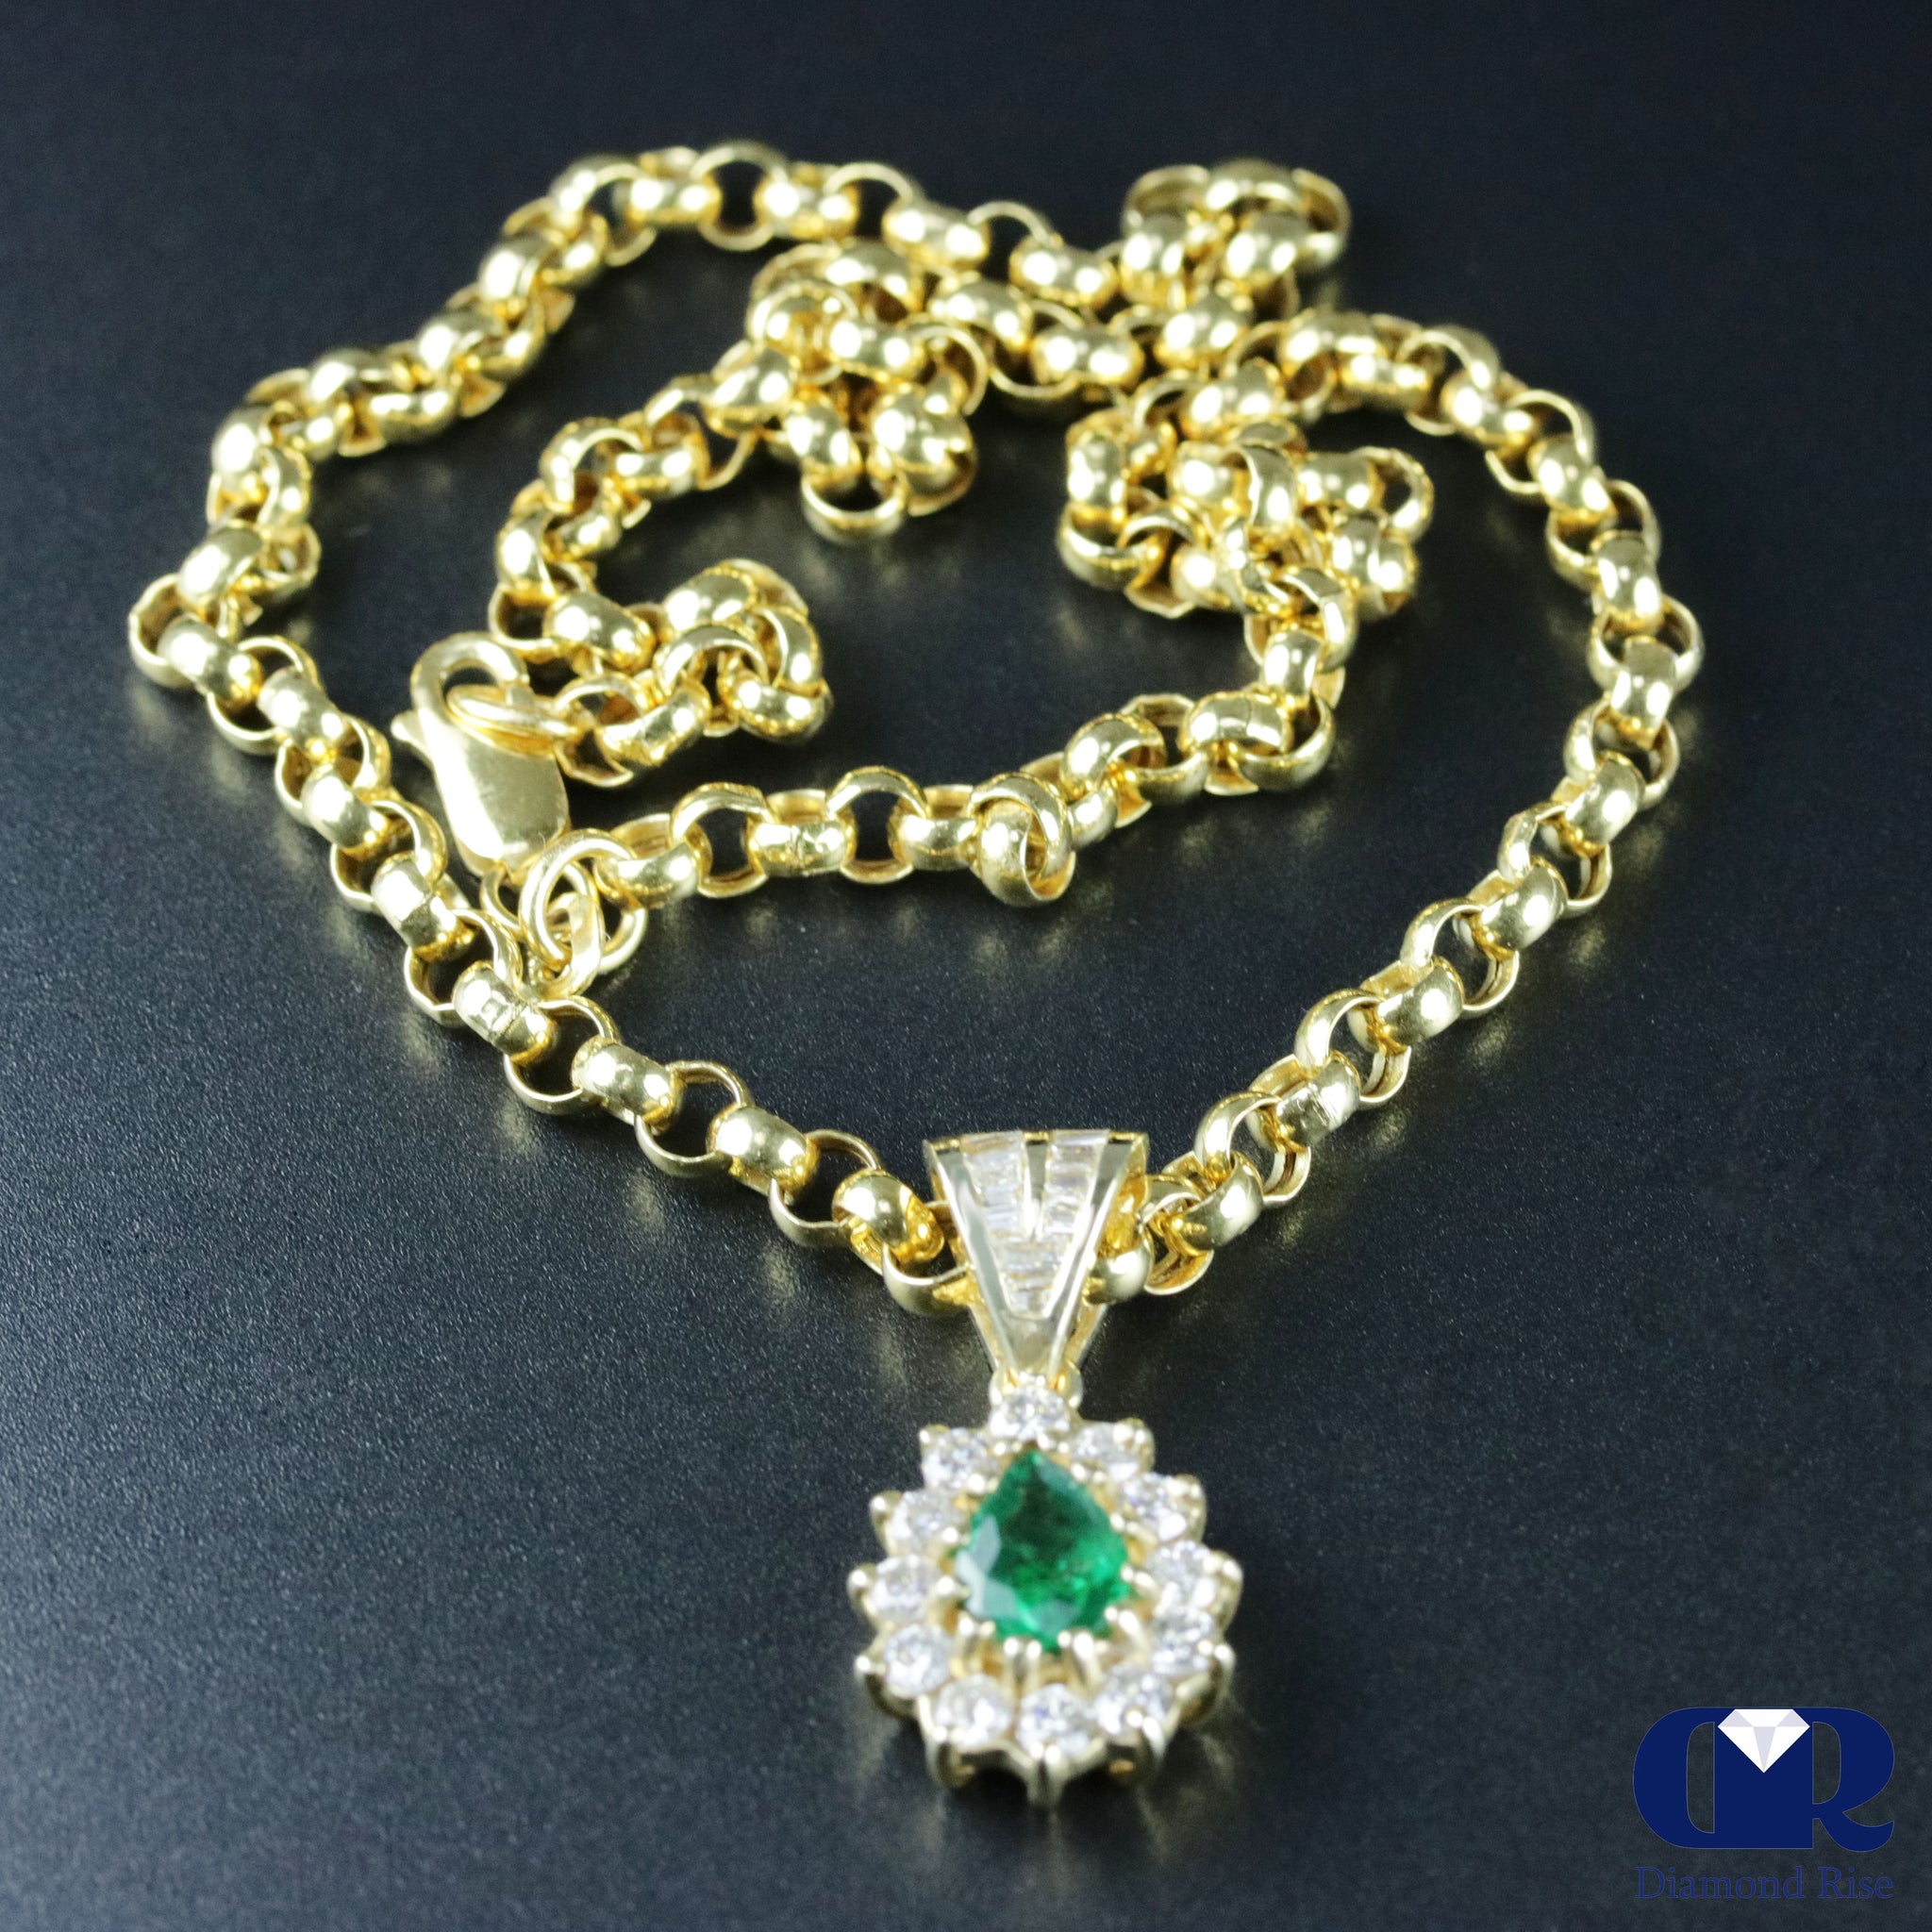 Pear Shaped Emerald & Diamond Drop Pendant Necklace In 14K Yellow Gold ...